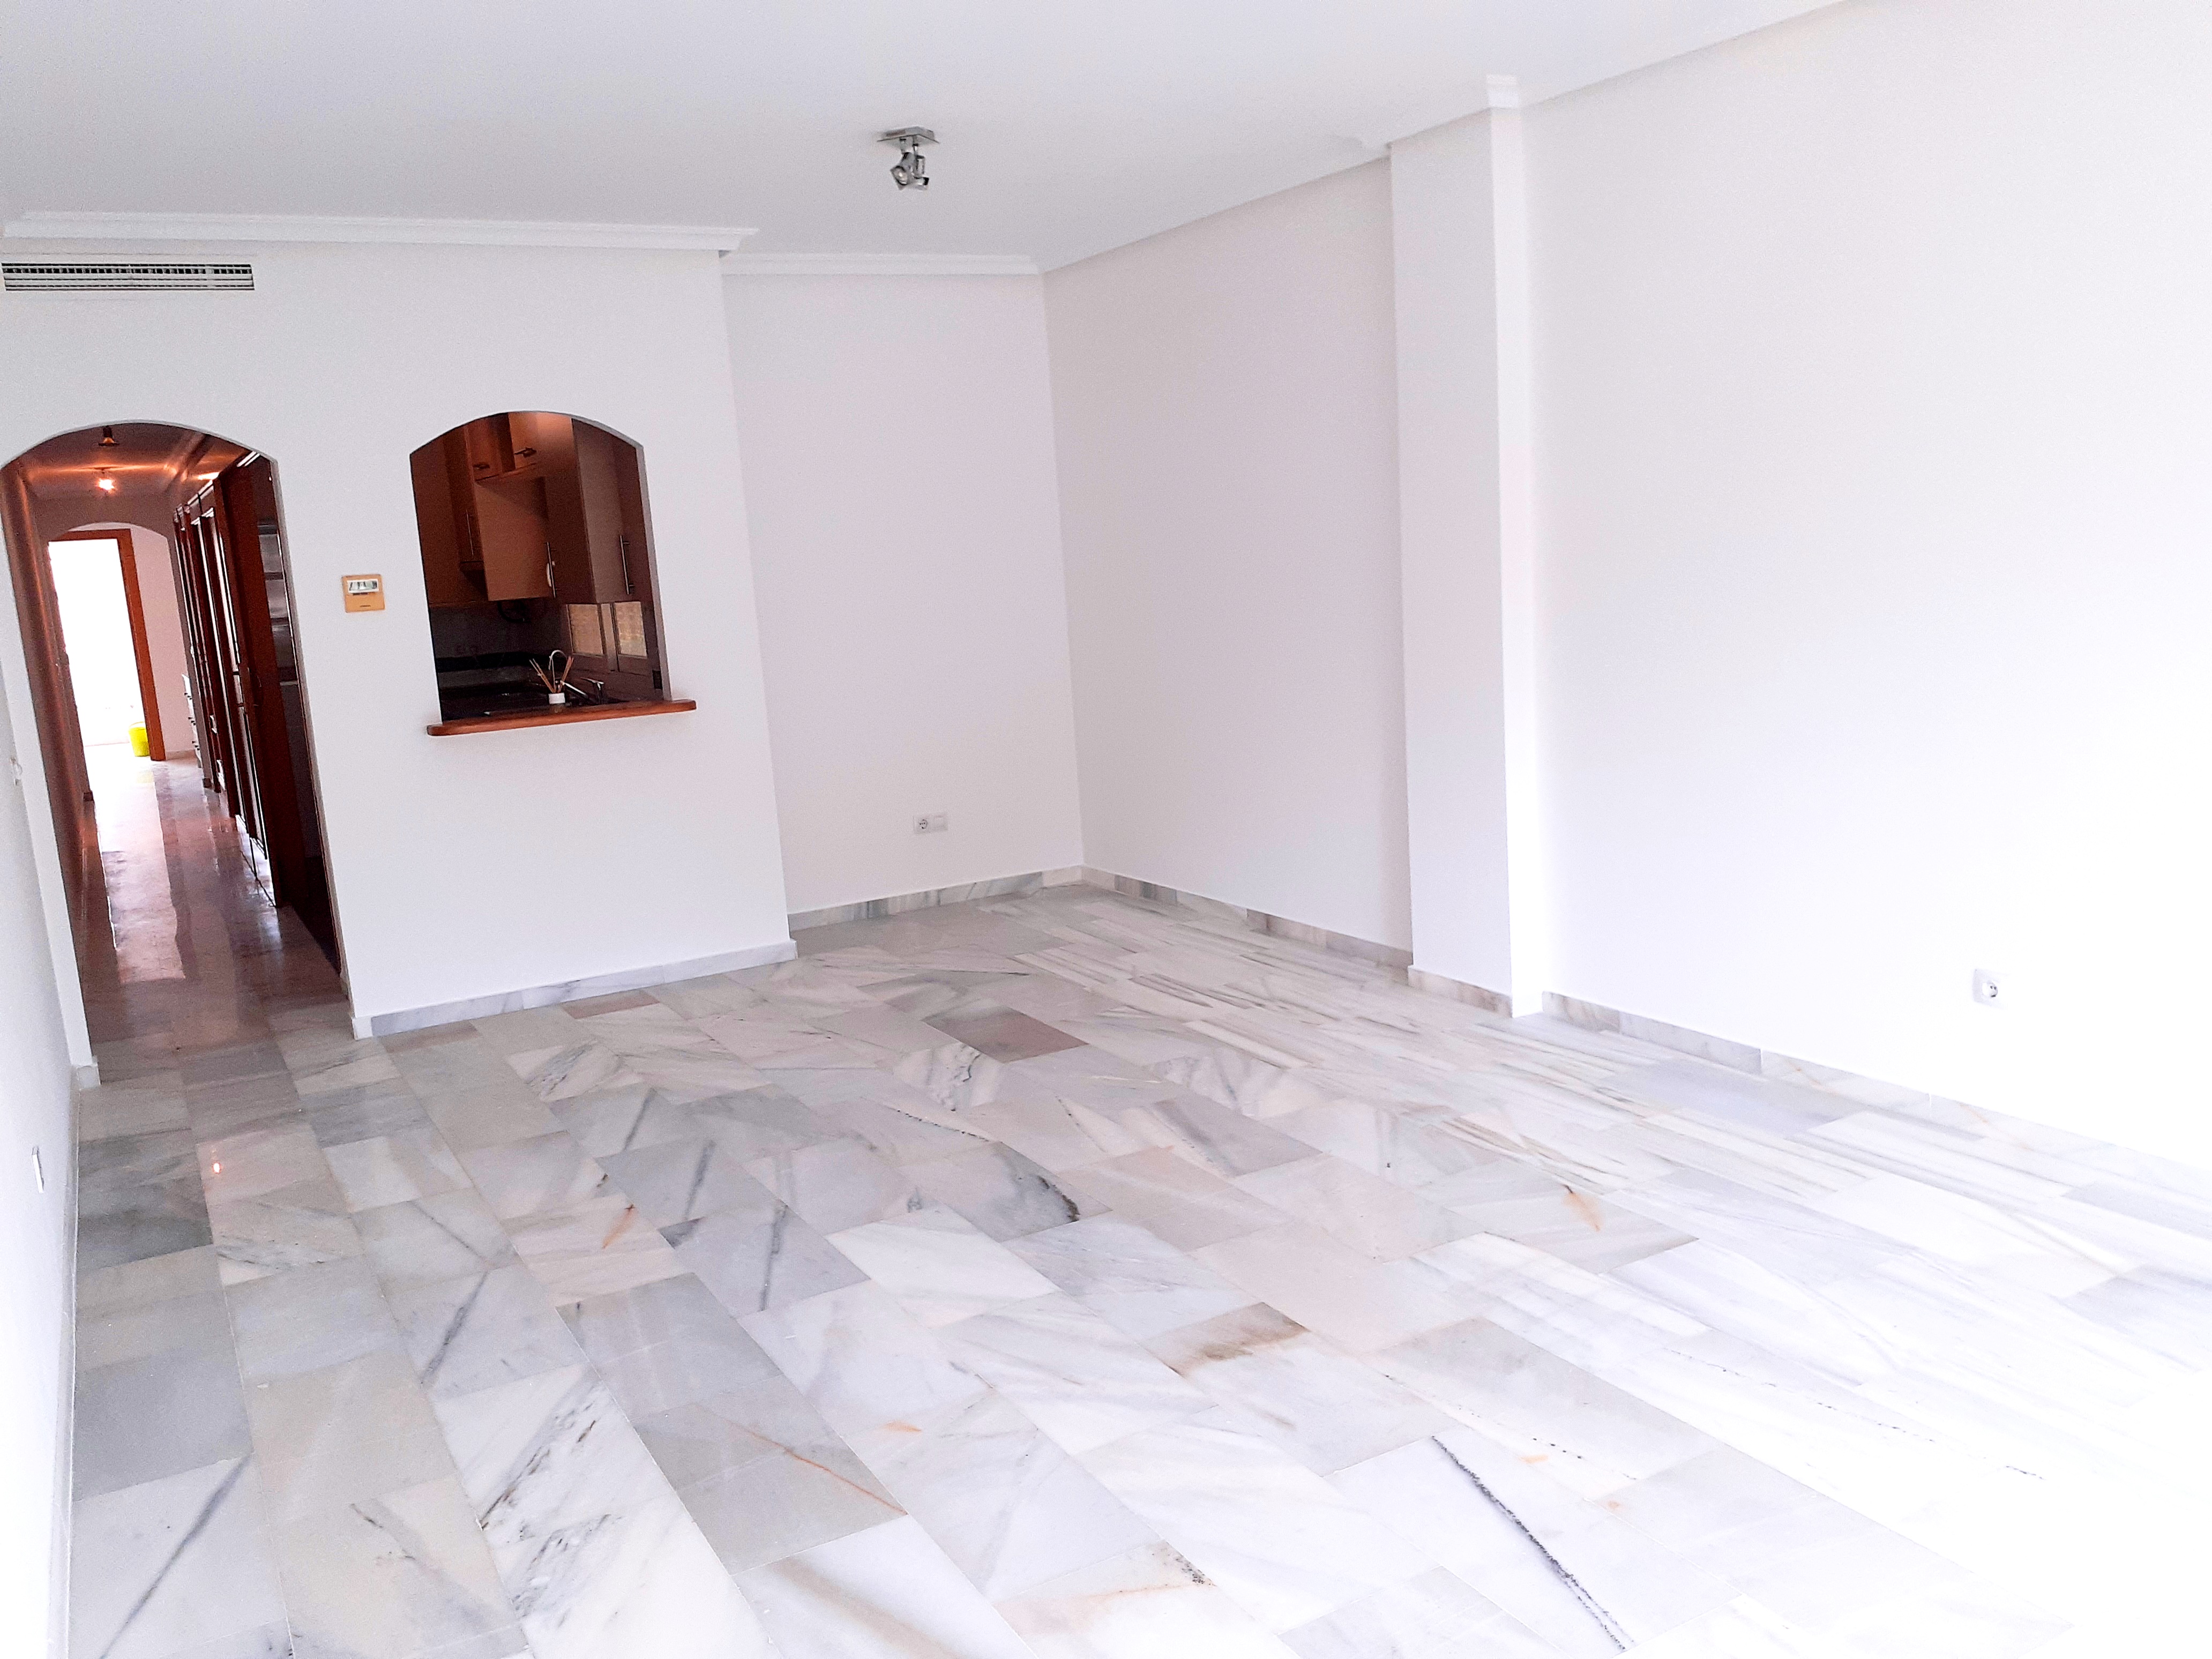 Apartment with 3 bedrooms and 2 bathrooms with garage and storage room in the center of Calpe. Central location and close to the beach and all amenities.